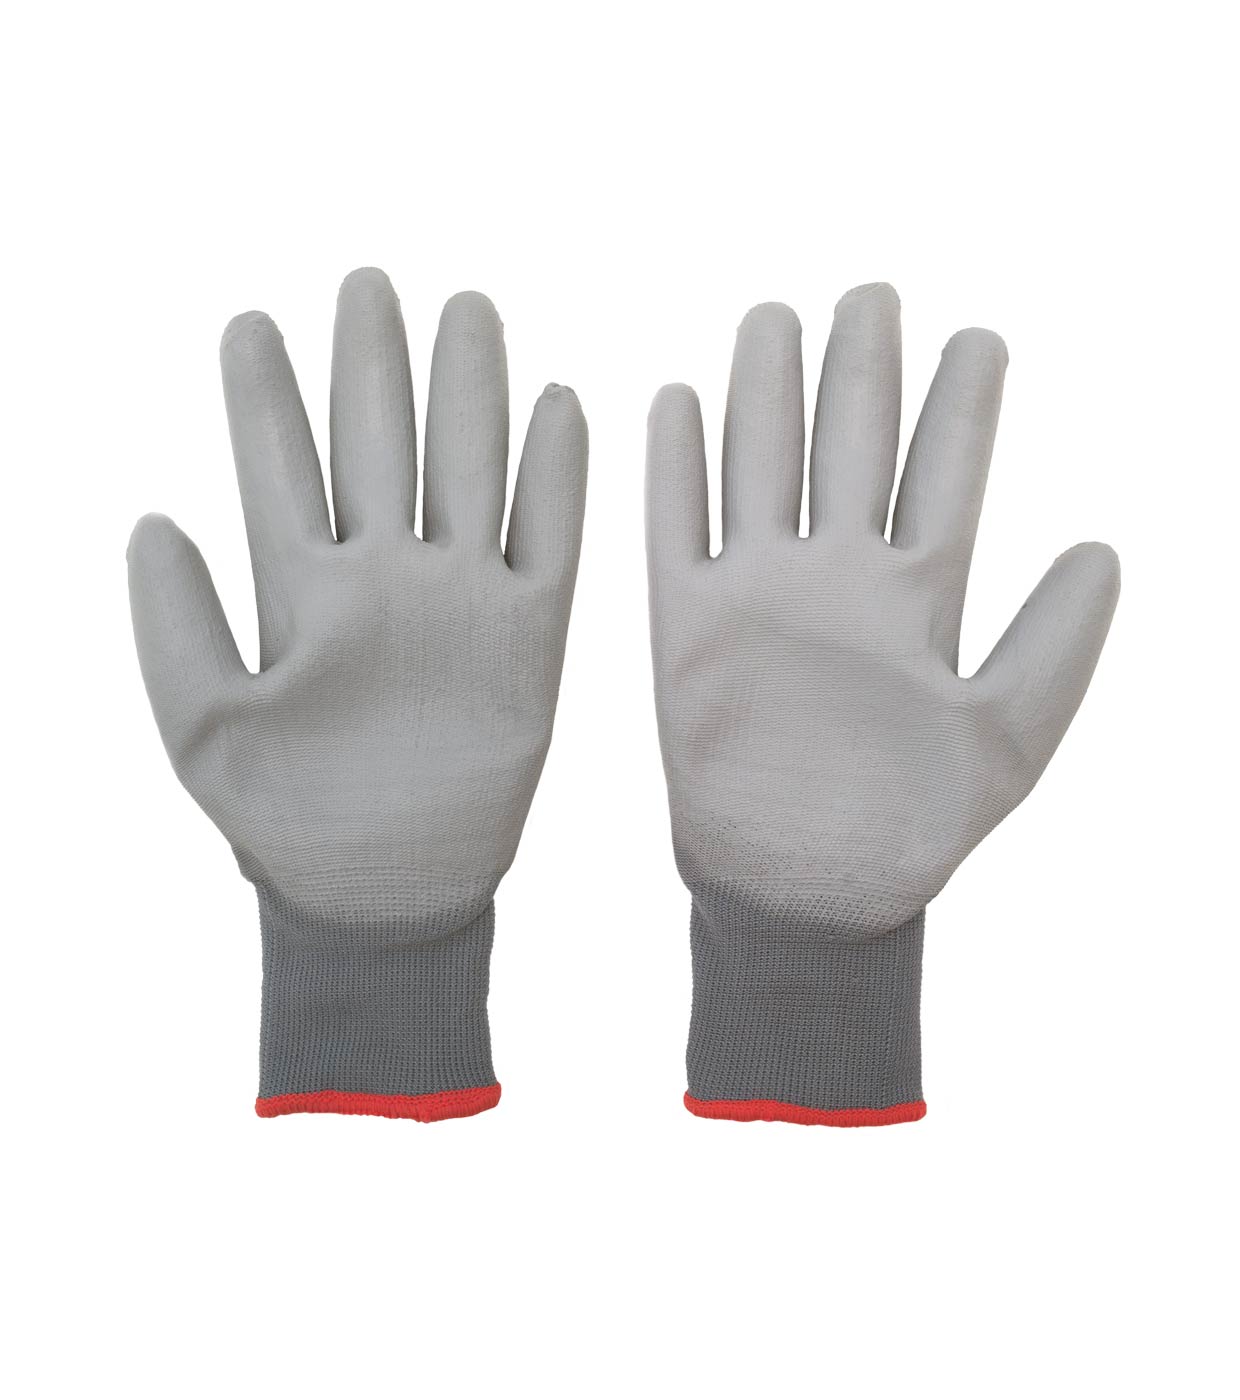 Mr Serious - Protective Winter Gloves